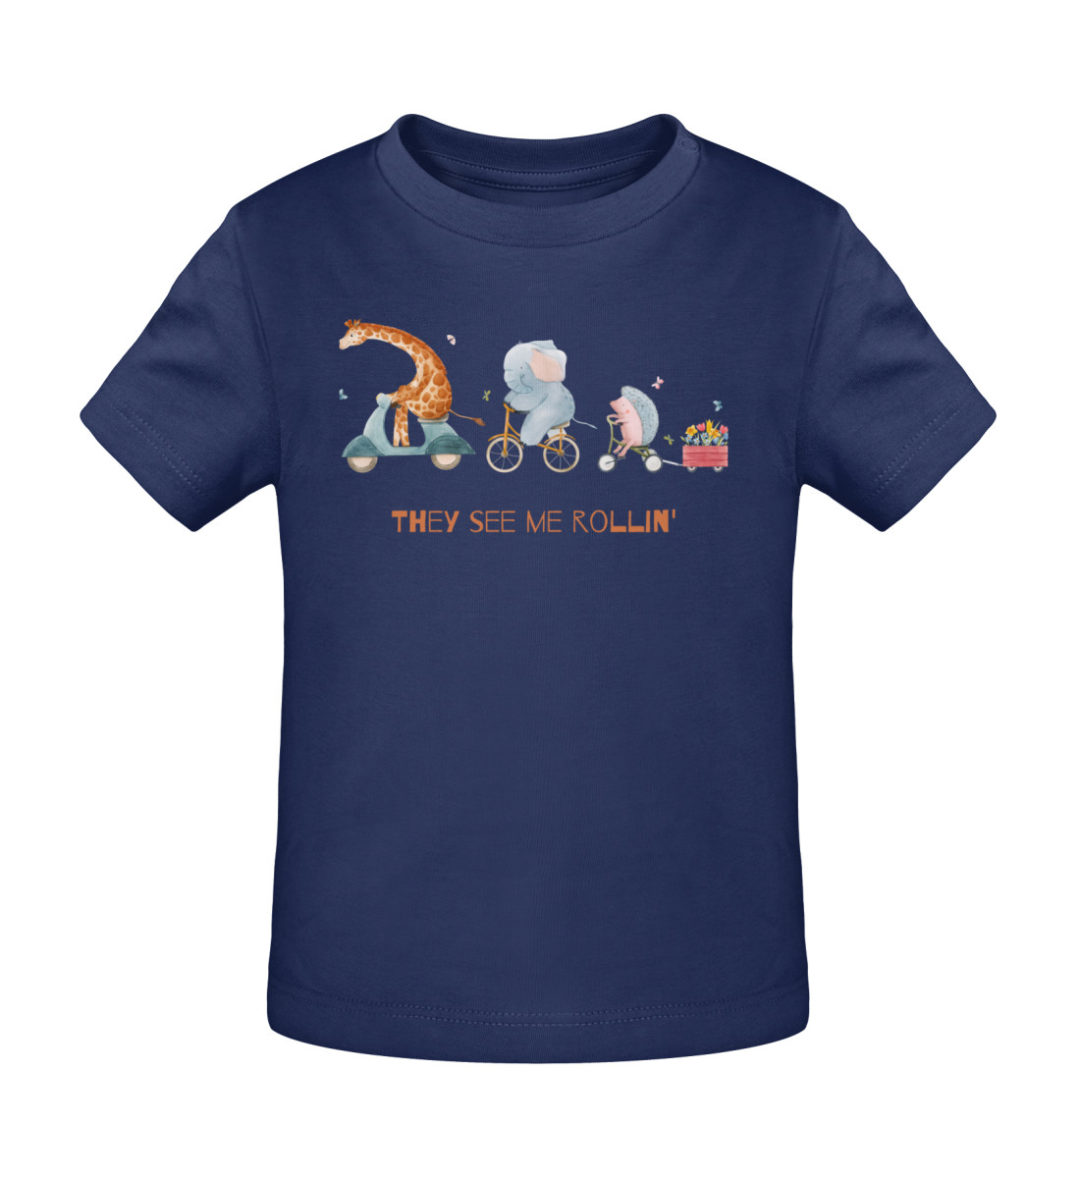 They see me rollin- - Baby Creator T-Shirt ST/ST-6057